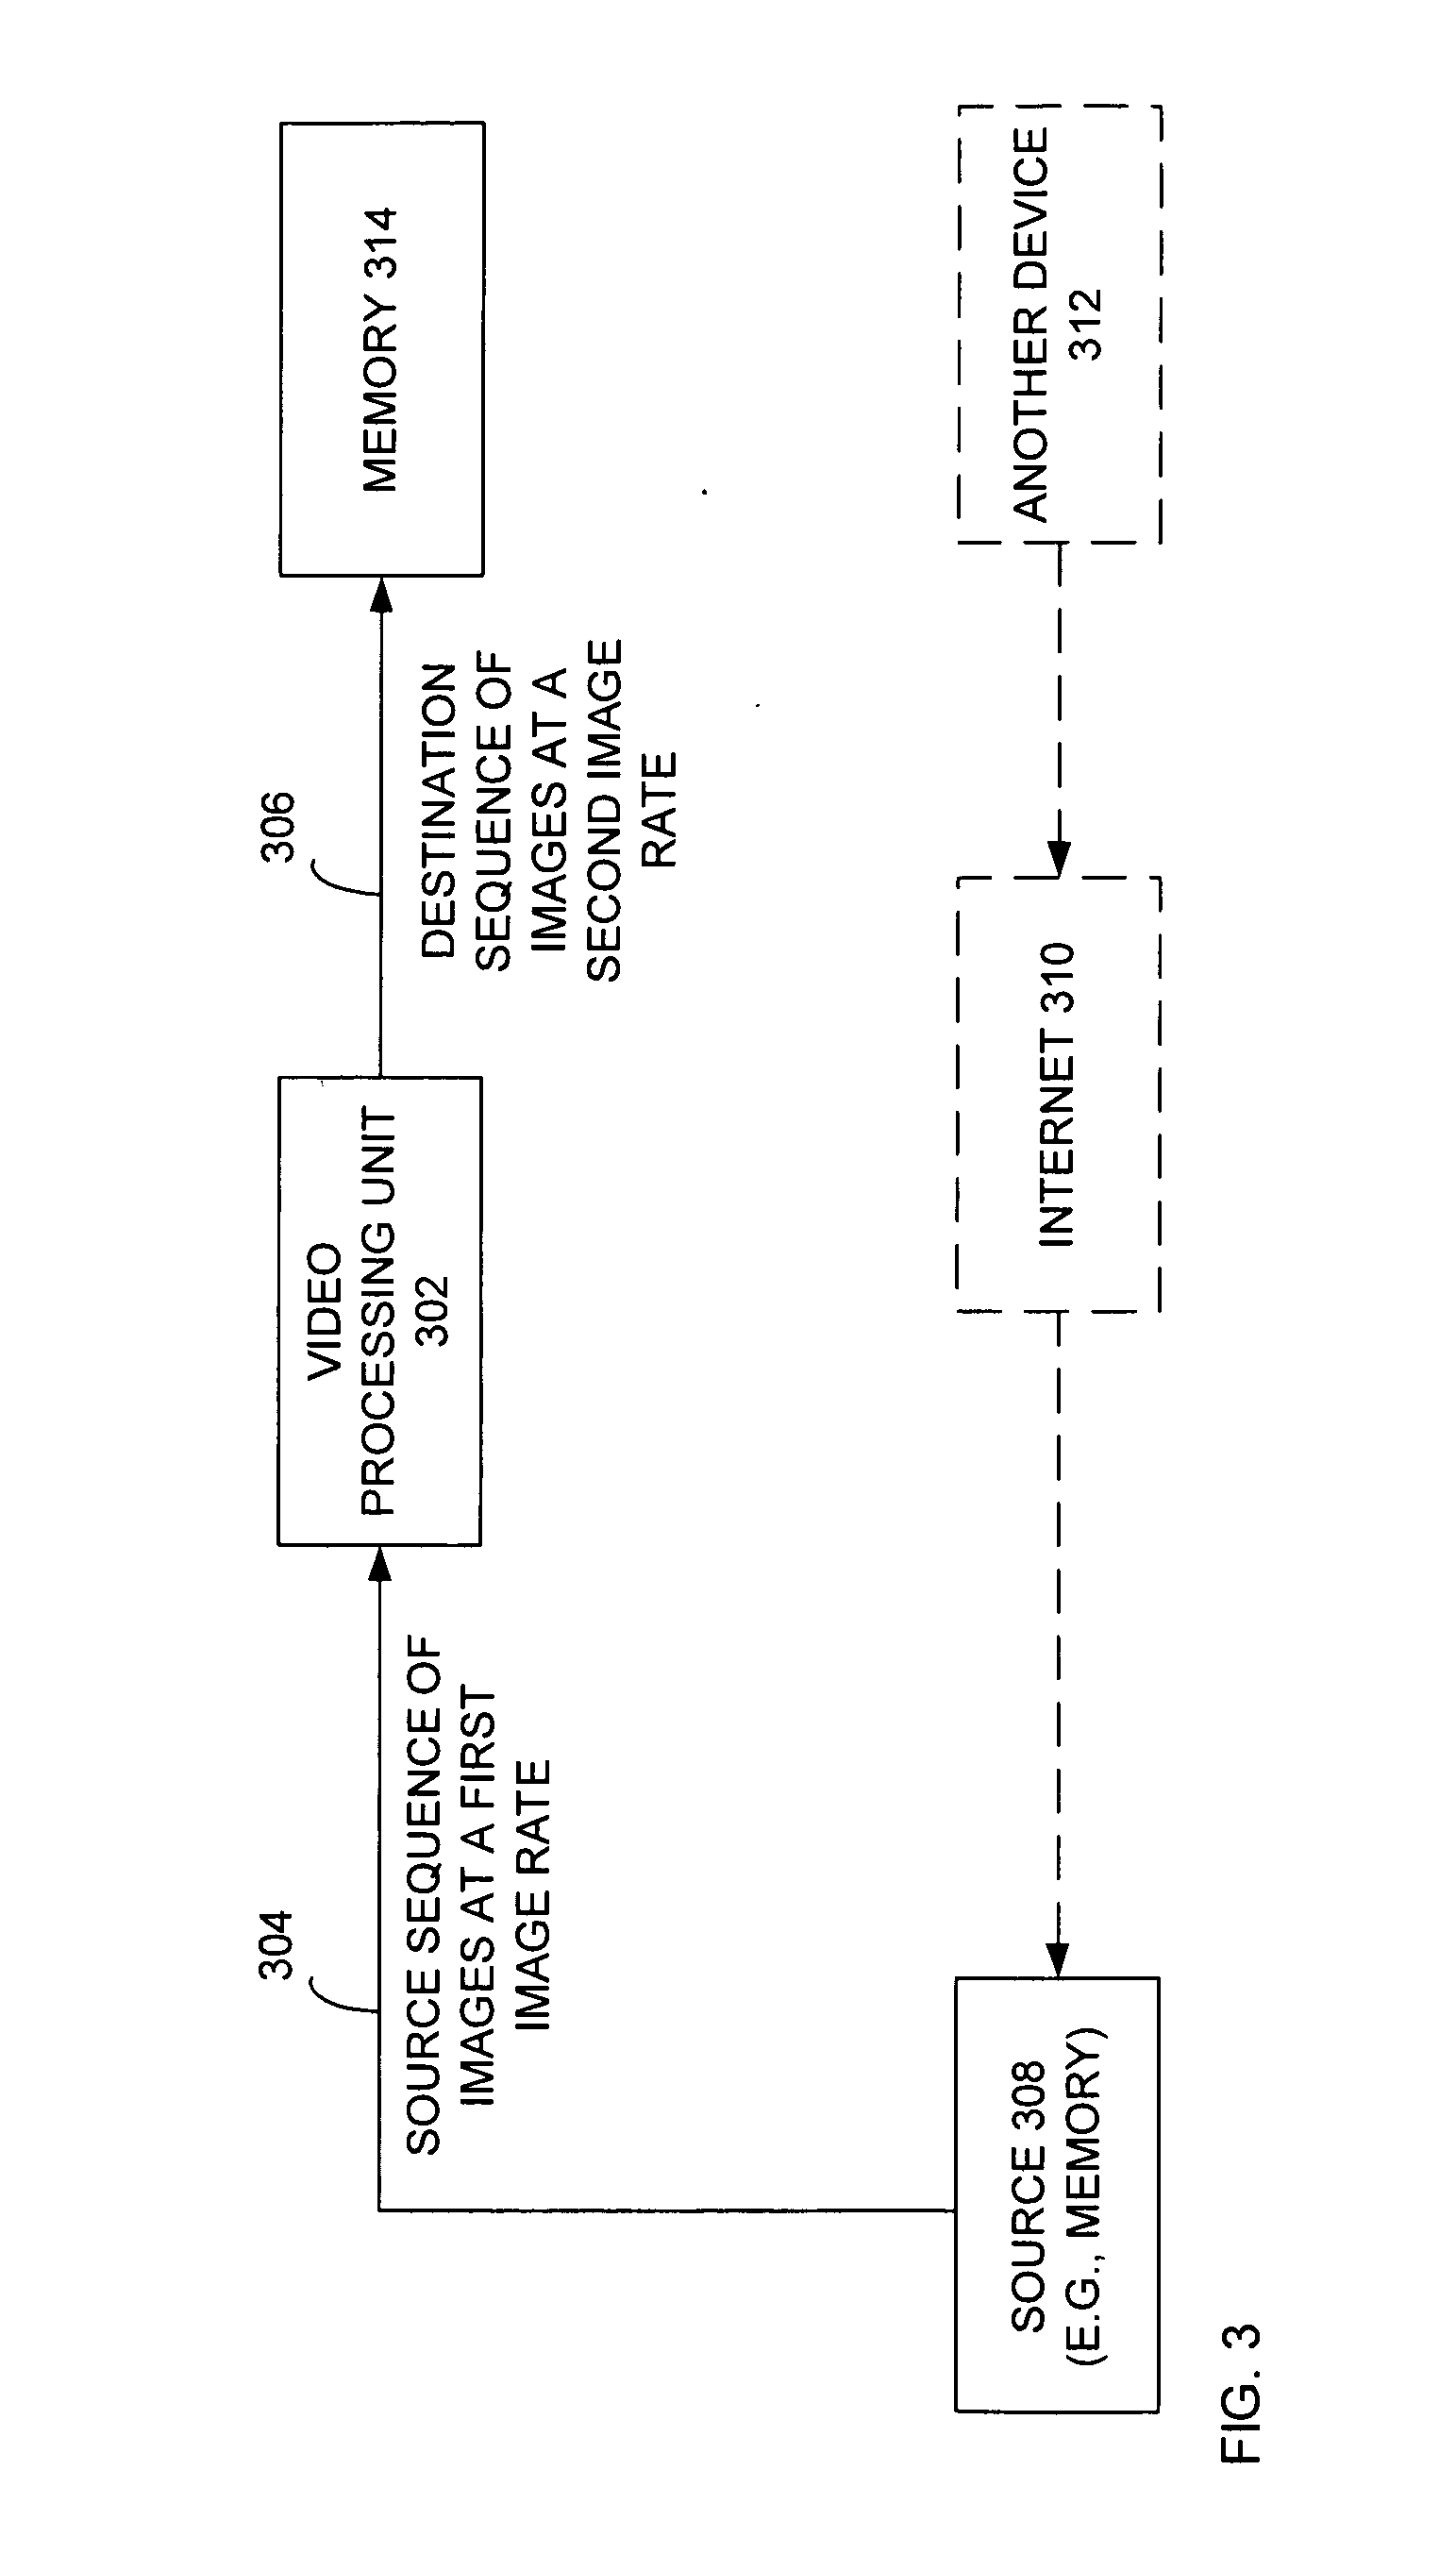 Apparatus and method for single-pass, gradient-based motion compensated image rate conversion